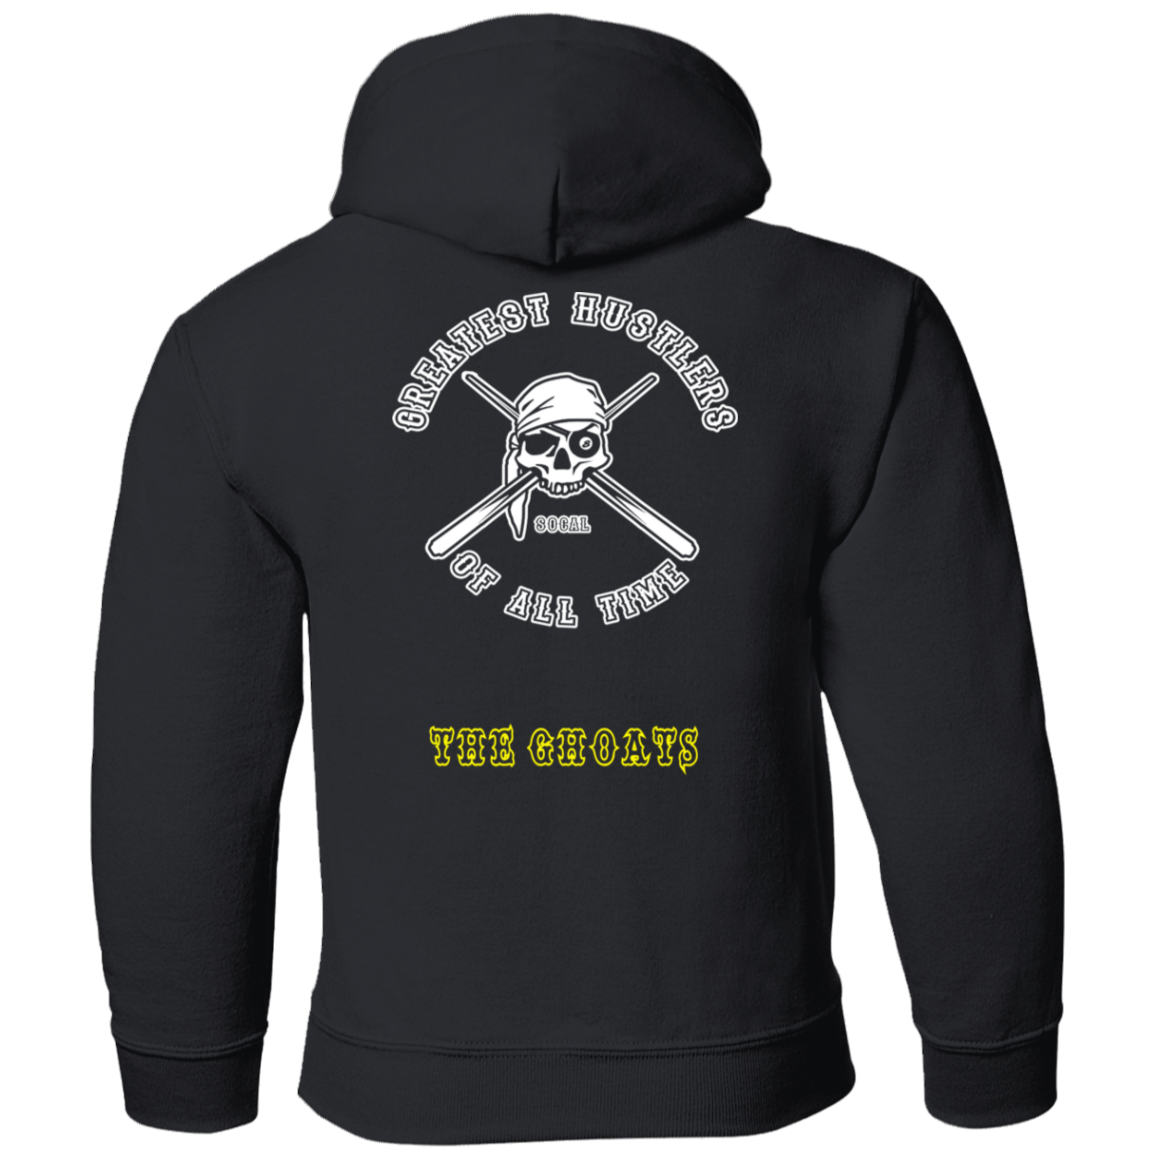 The GHOATS Custom Design. #4 Motorcycle Club Style. Ver 1/2. Youth Pullover Hoodie